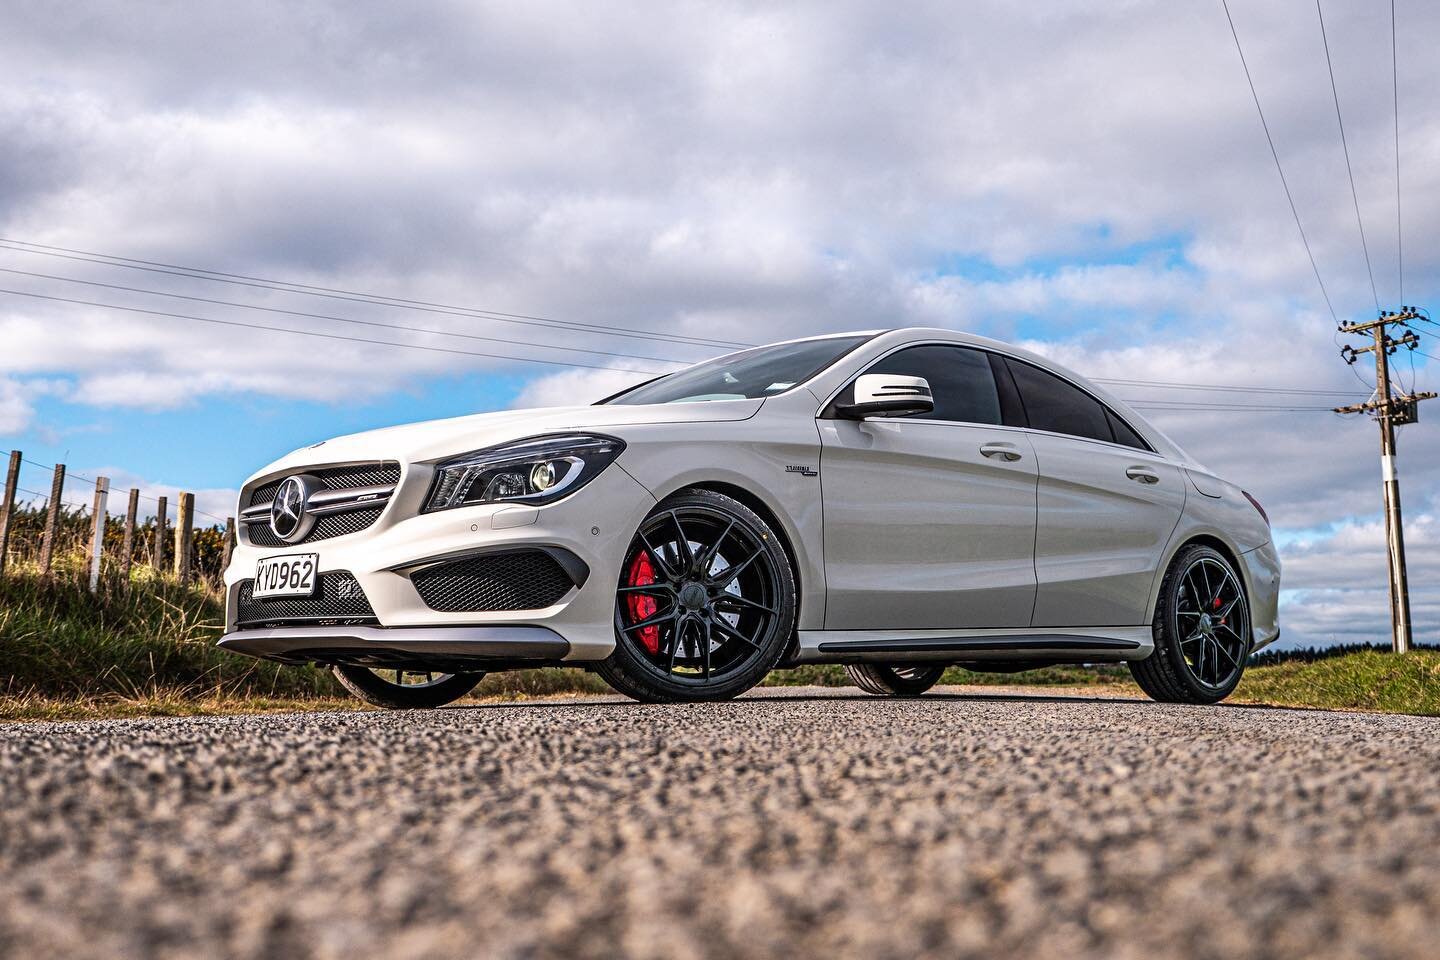 Incredible how professional photos of your car, house, items or services can speed up the selling process. 

#rubtech #photography #car #mercedesbenz #cla45 #automotivephotography #newzealand #videogrpahy #sell #sail #trademe #tradememotors #Auckland